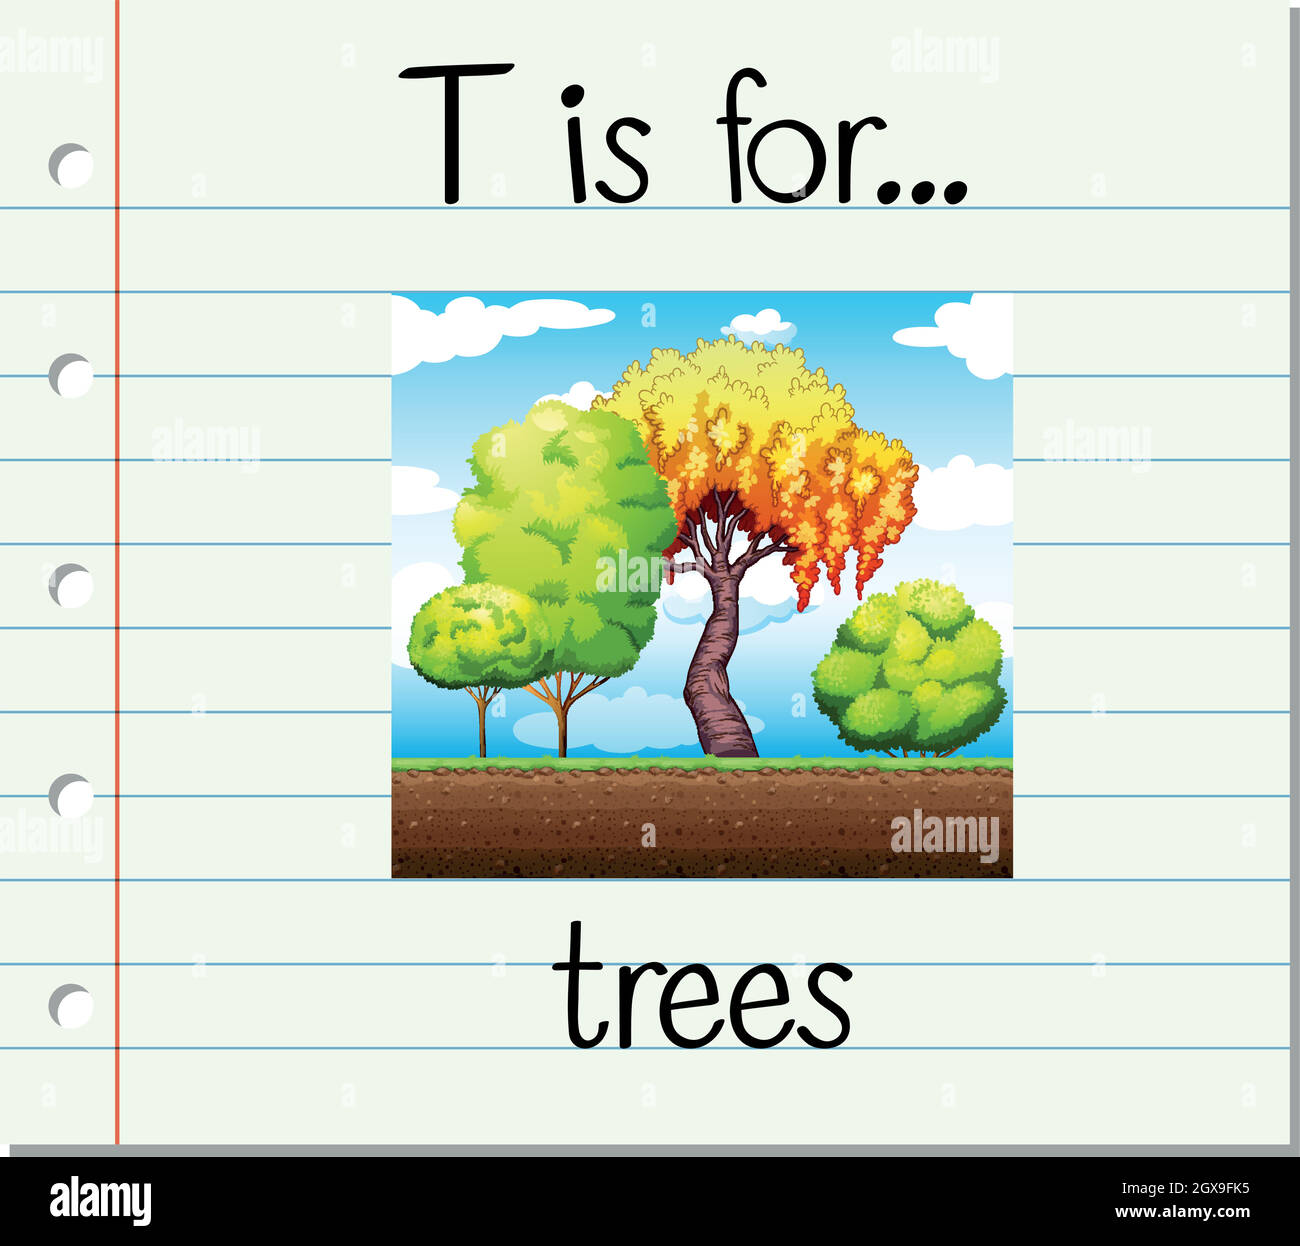 Flashcard letter T is for trees Stock Vector